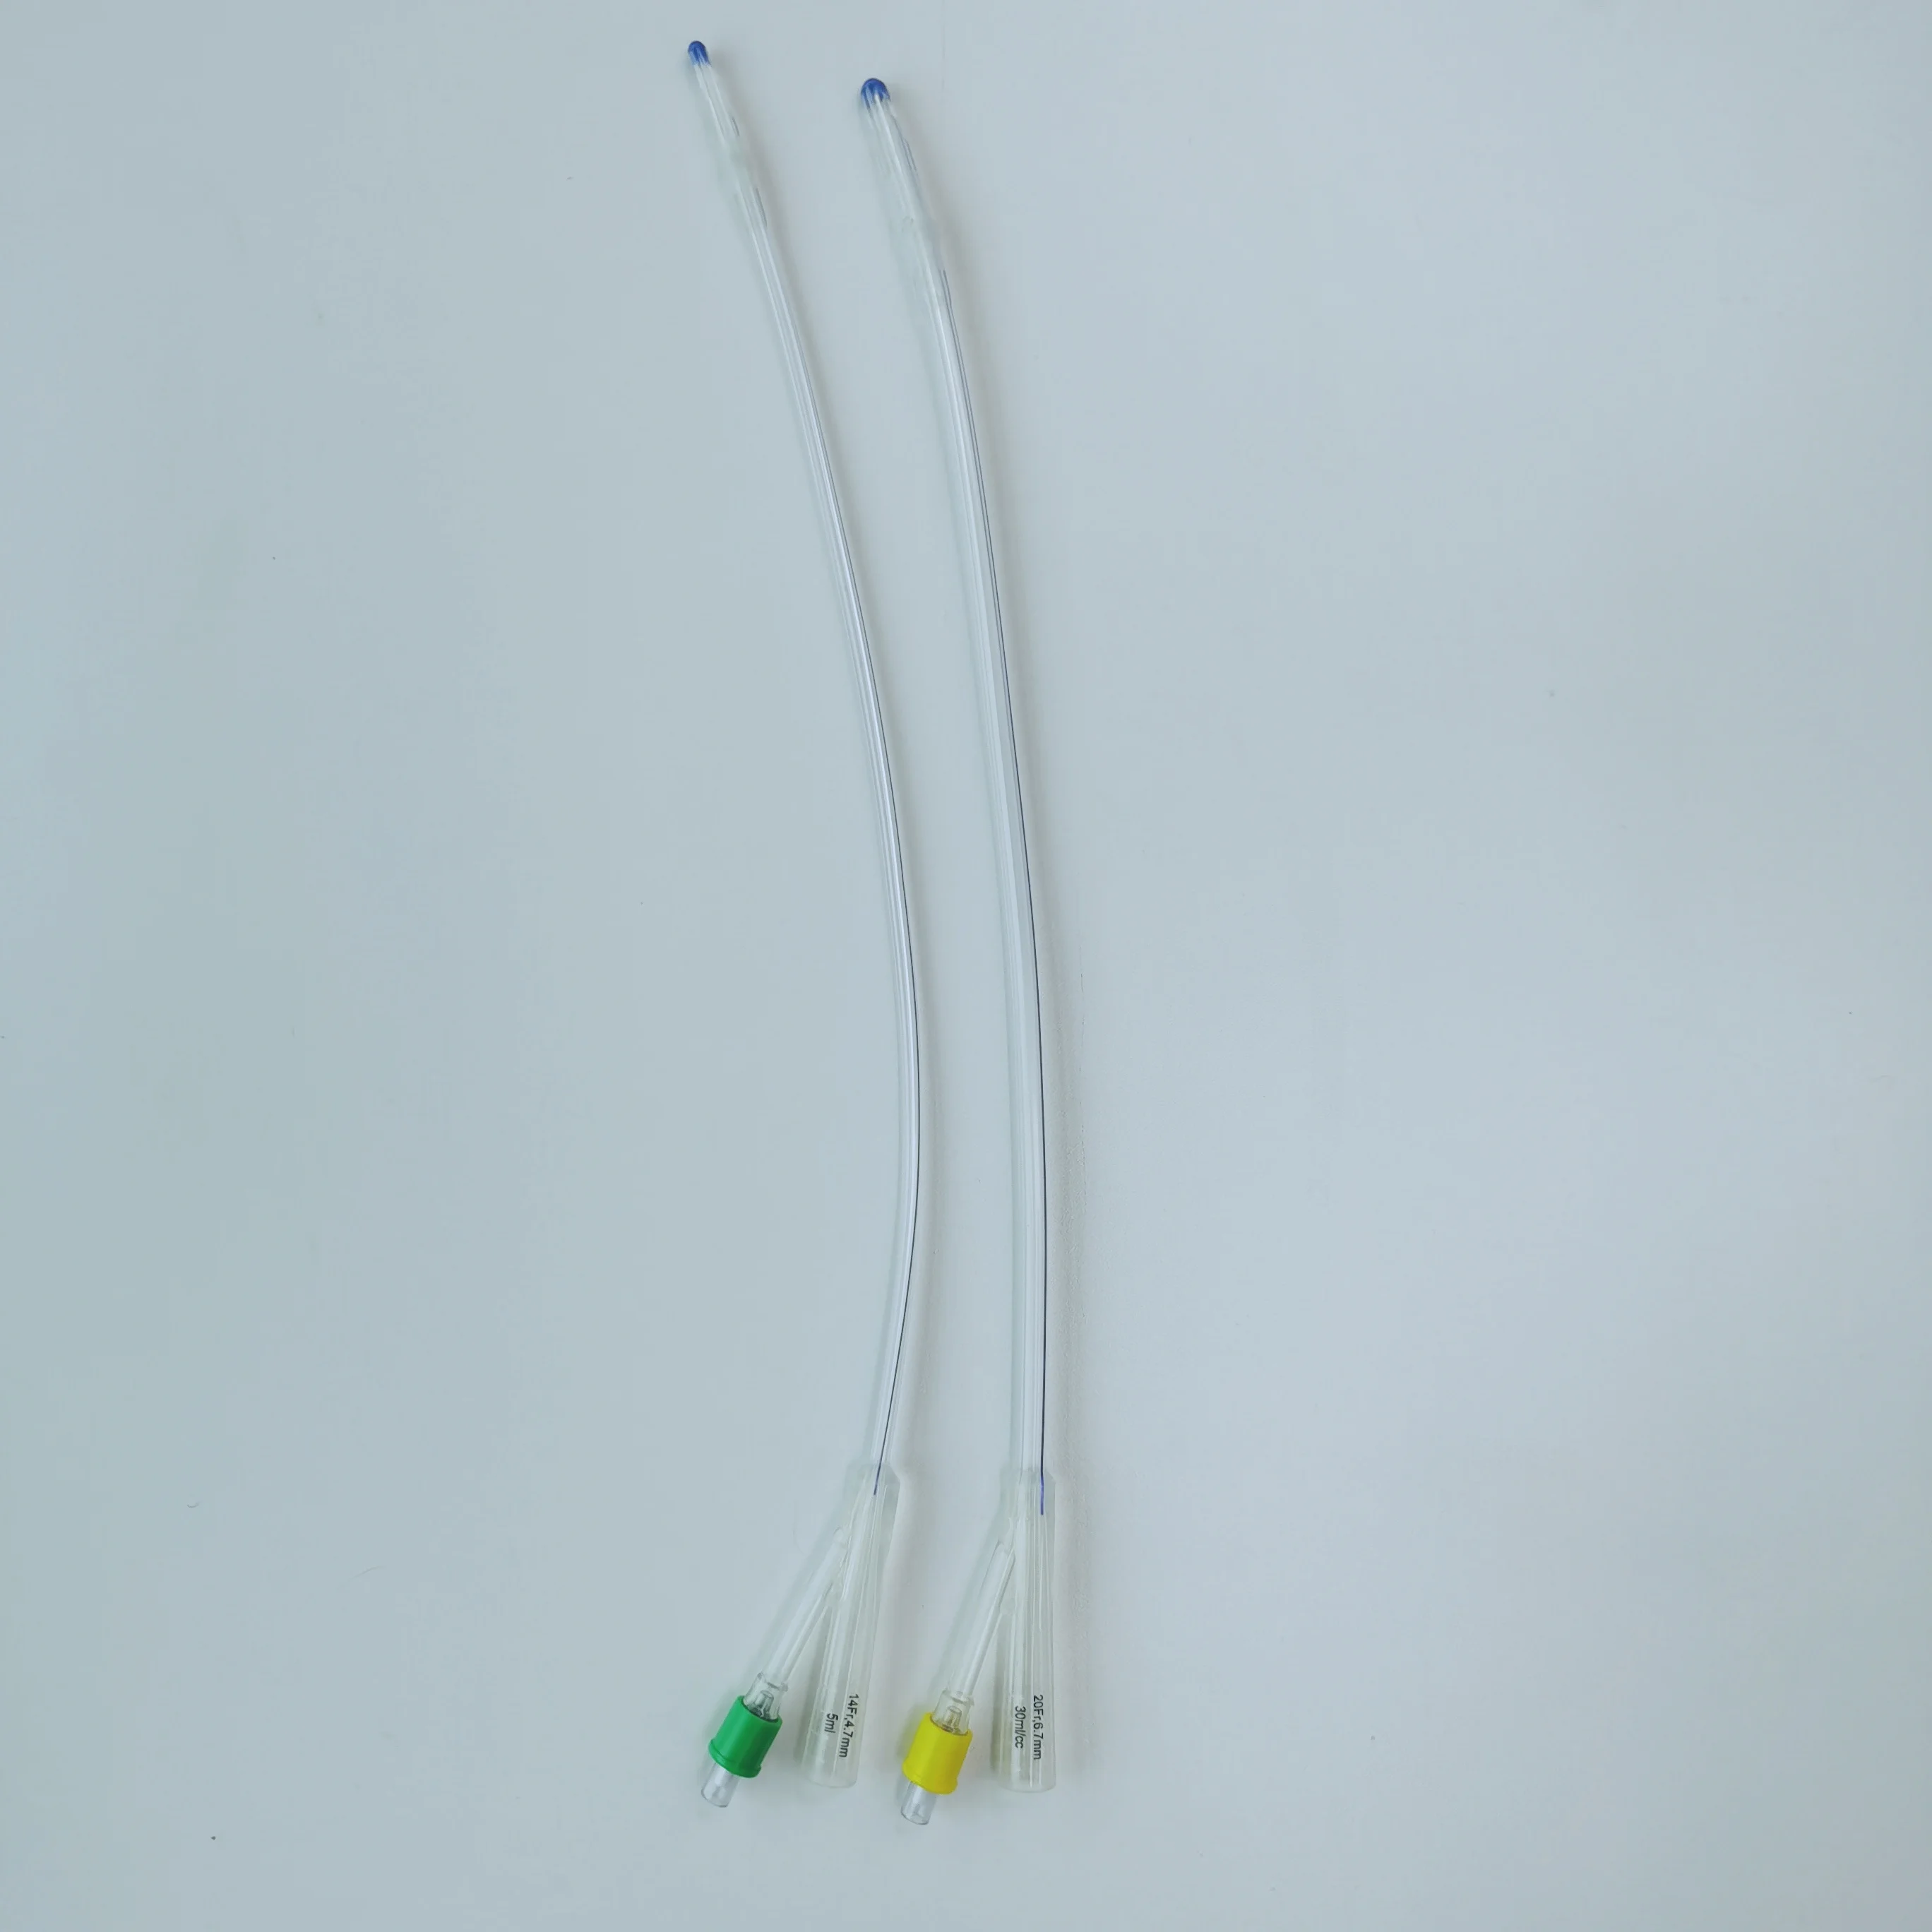 silicone Foley catheter good bio-compatibility medical grade silicone OEM available and free factory price solid quality